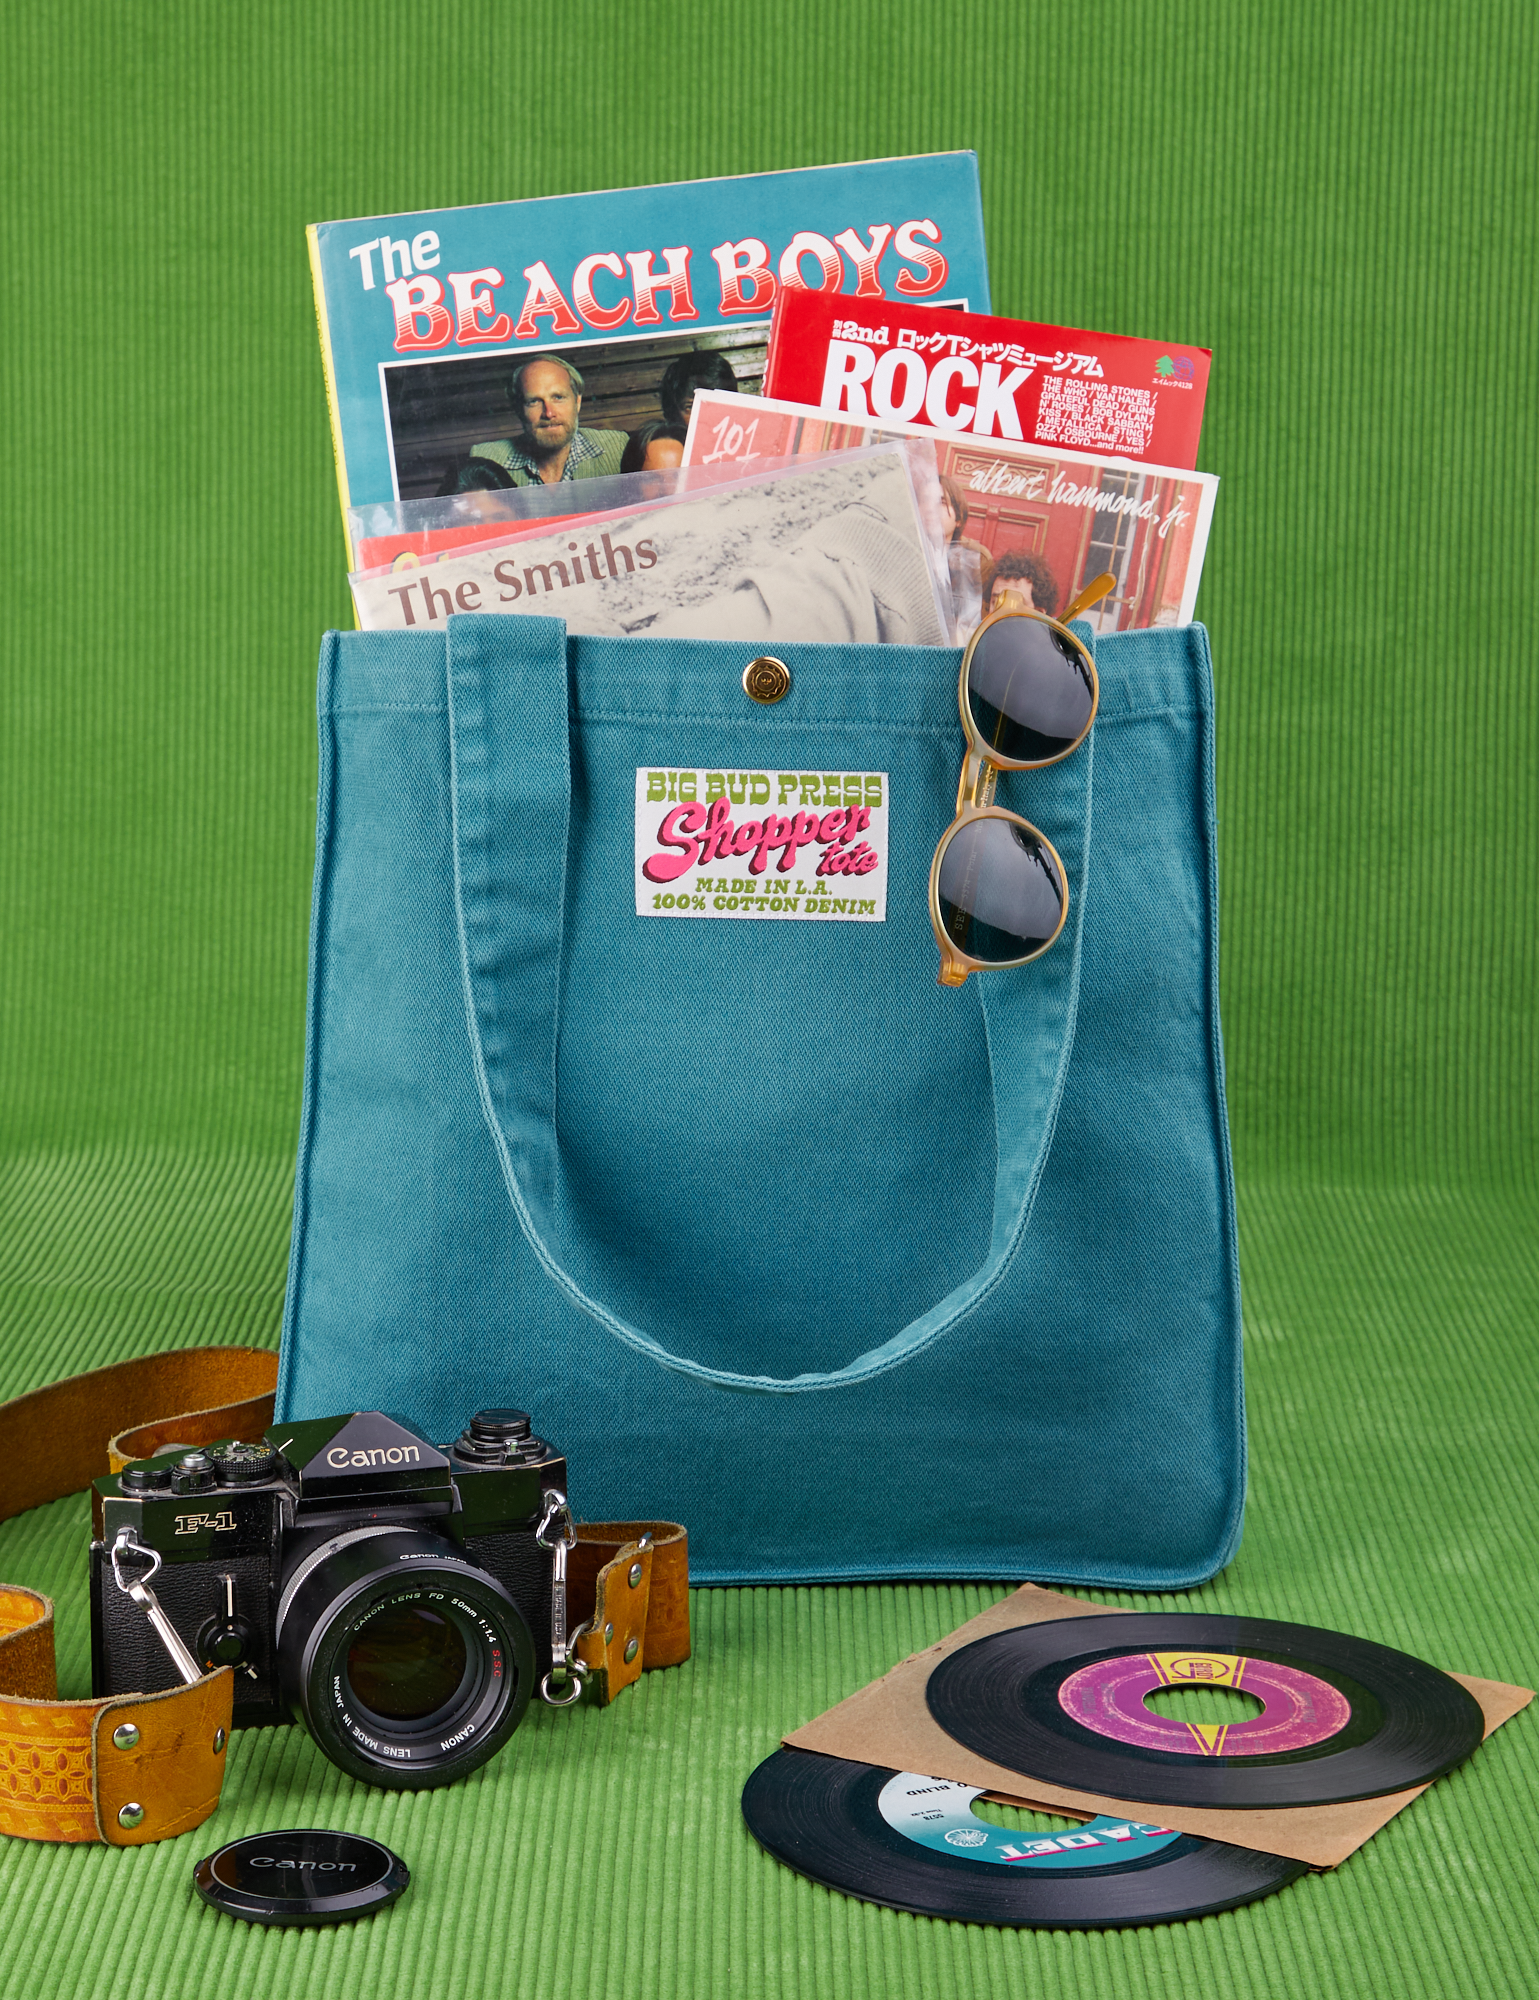 Shopper Tote Bag in Marine Blue with records and books inside. Camera sits in front of bag.